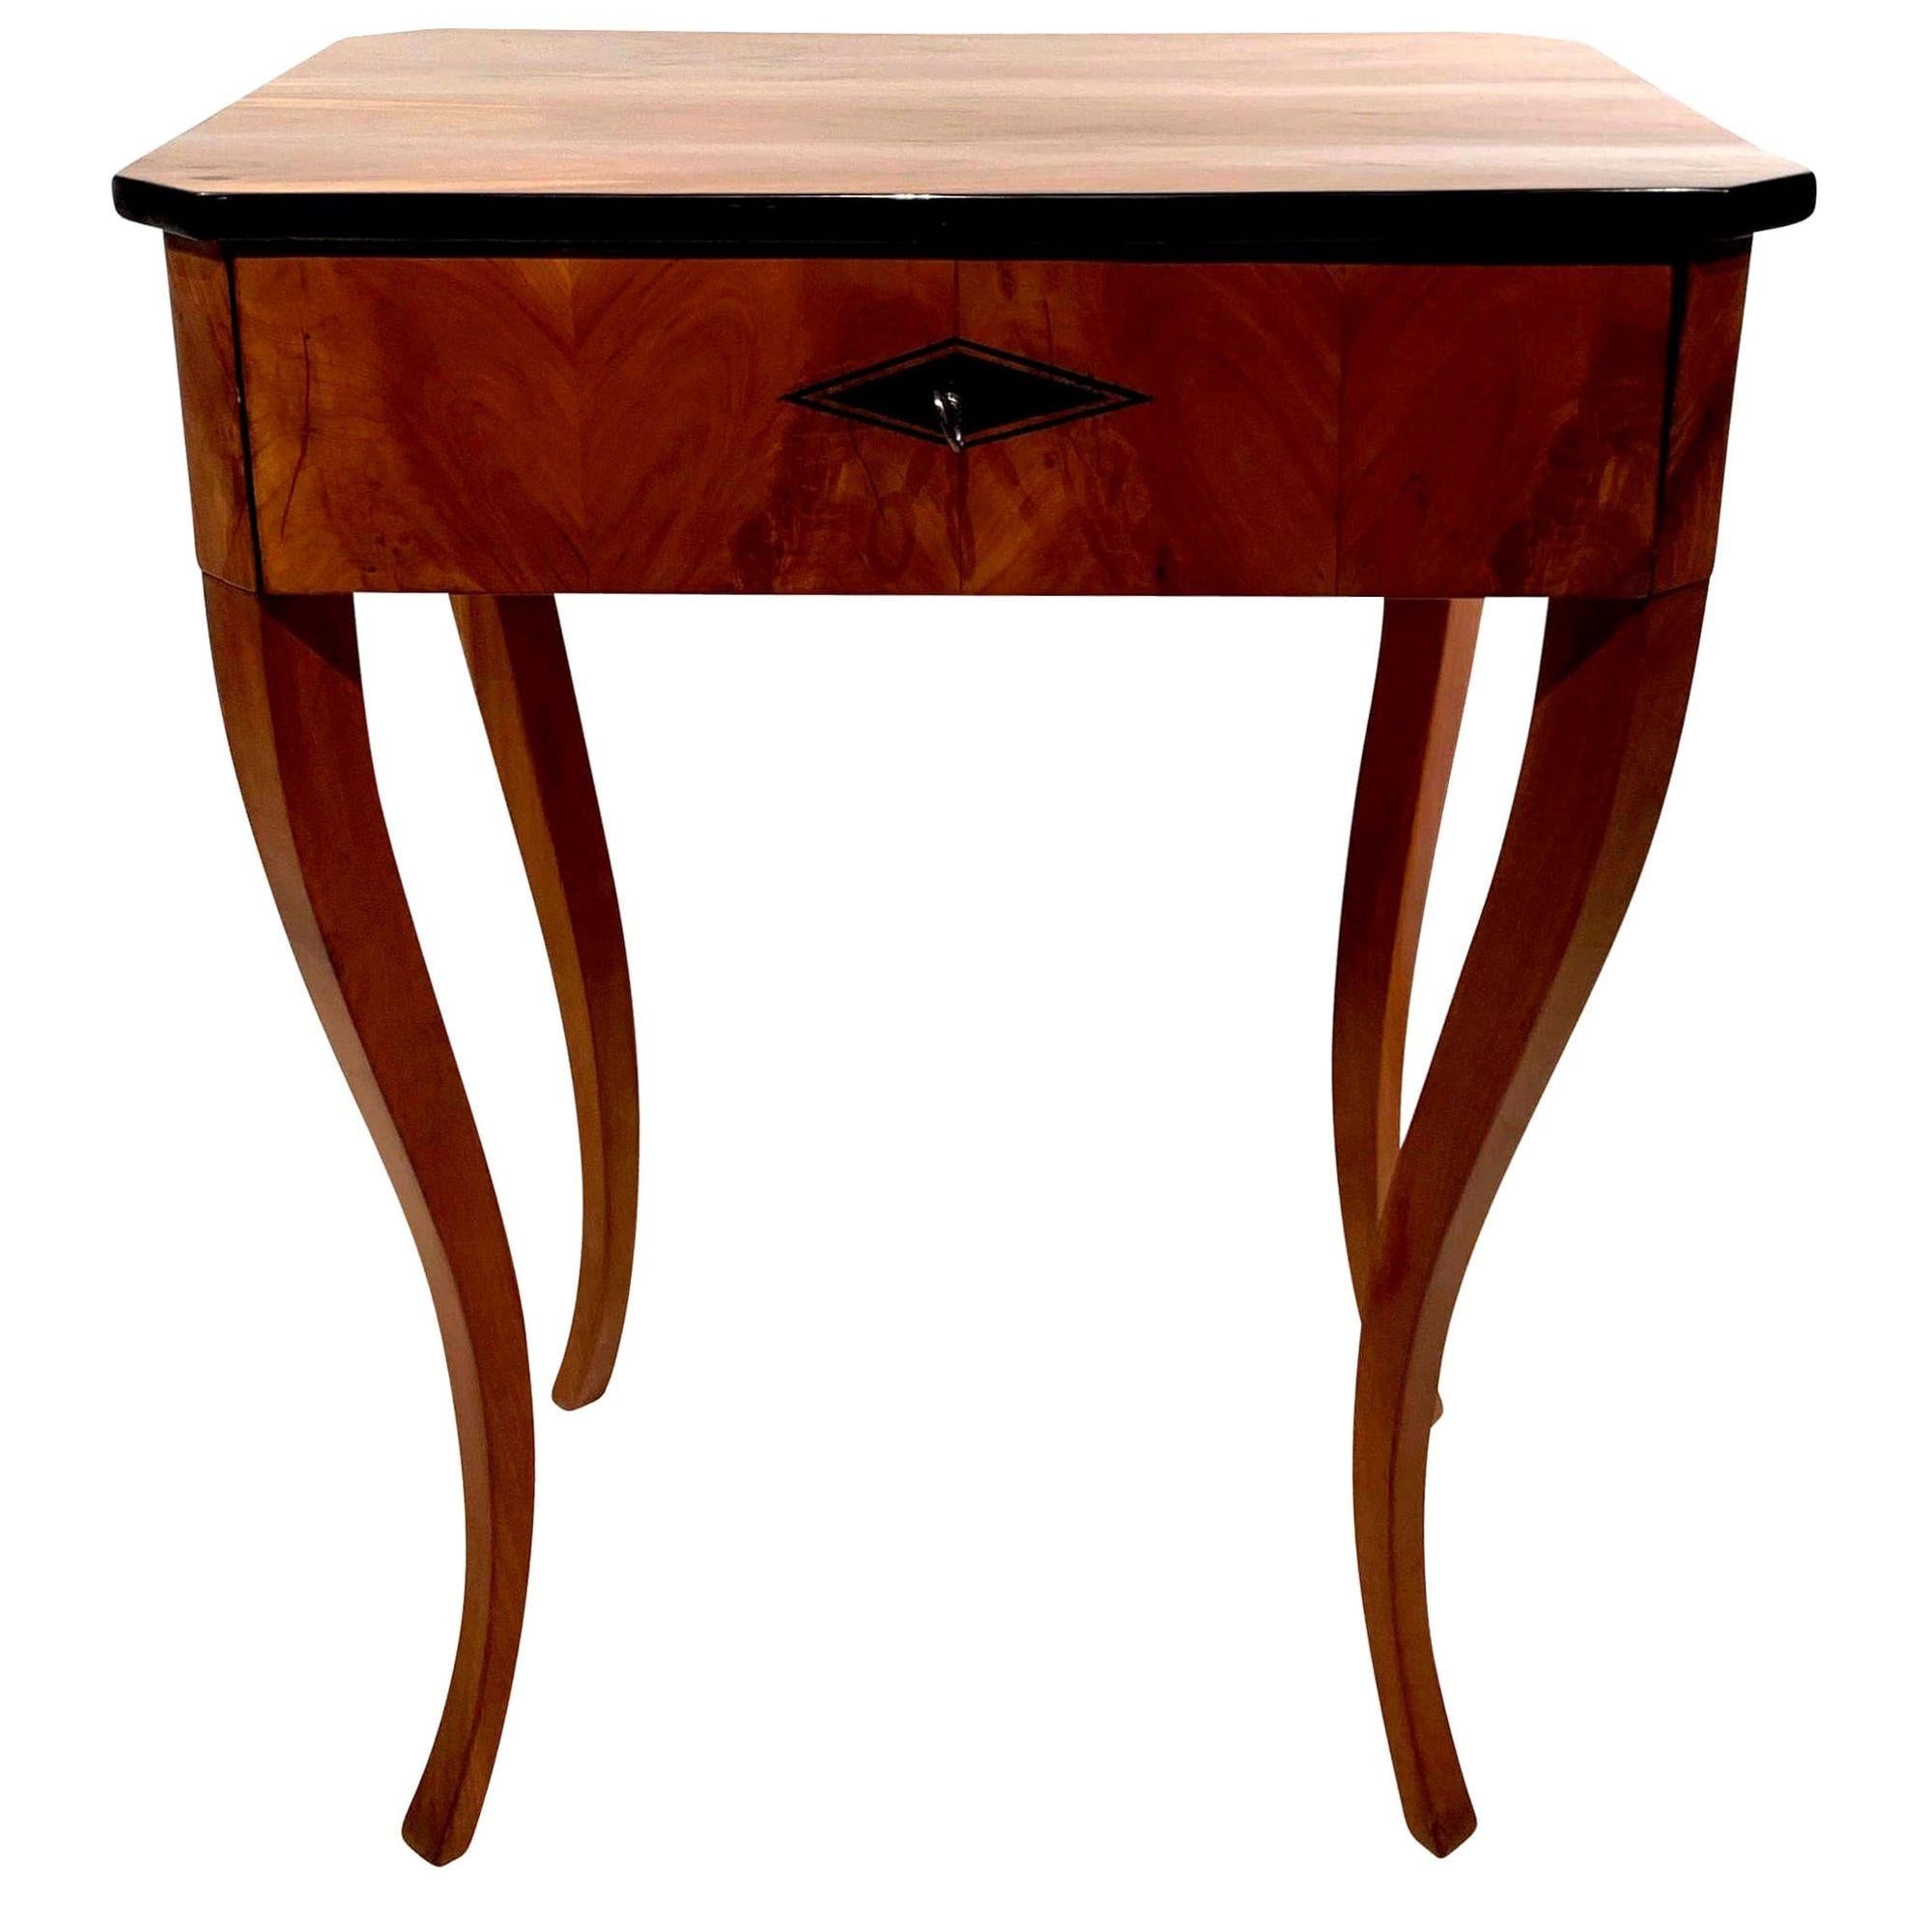 Biedermeier side table with drawer, cherry veneer, South Germany, circa 1830

Wonderful cherry veneer and solid wood. Hand-polished with shellac (French Polish)
Elegantly curved square tapered legs. One-drawer with Ink painted / ebonized hash.